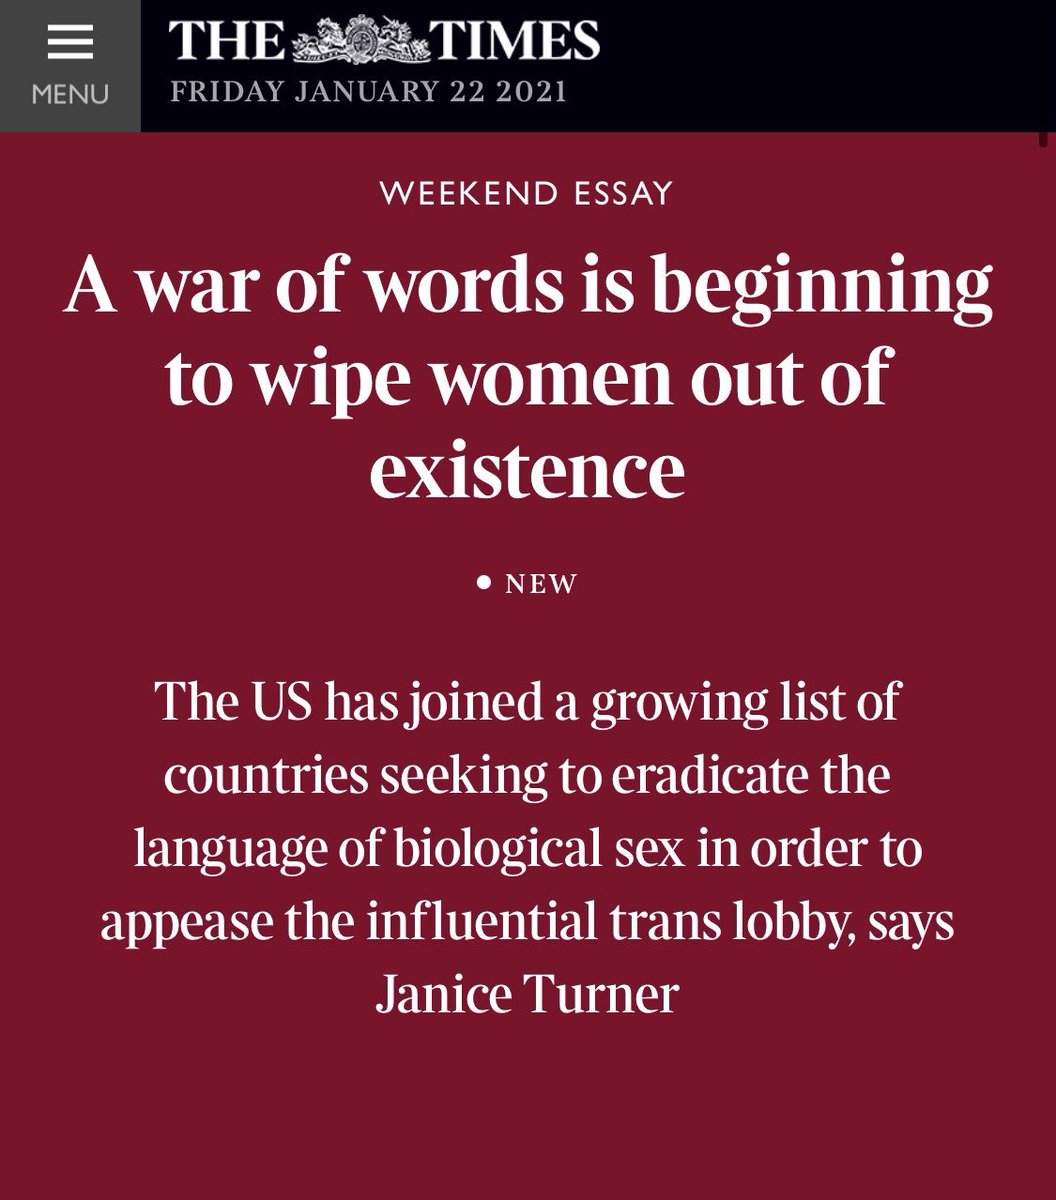 "war...is beginning""wipe women out of existence""Eradicate""Appease the influential trans lobby" The use of these words is careful and intentional. It's meant to incite fear and hate, and make an authoritative monolith of a group of people who make up <1% of the population.